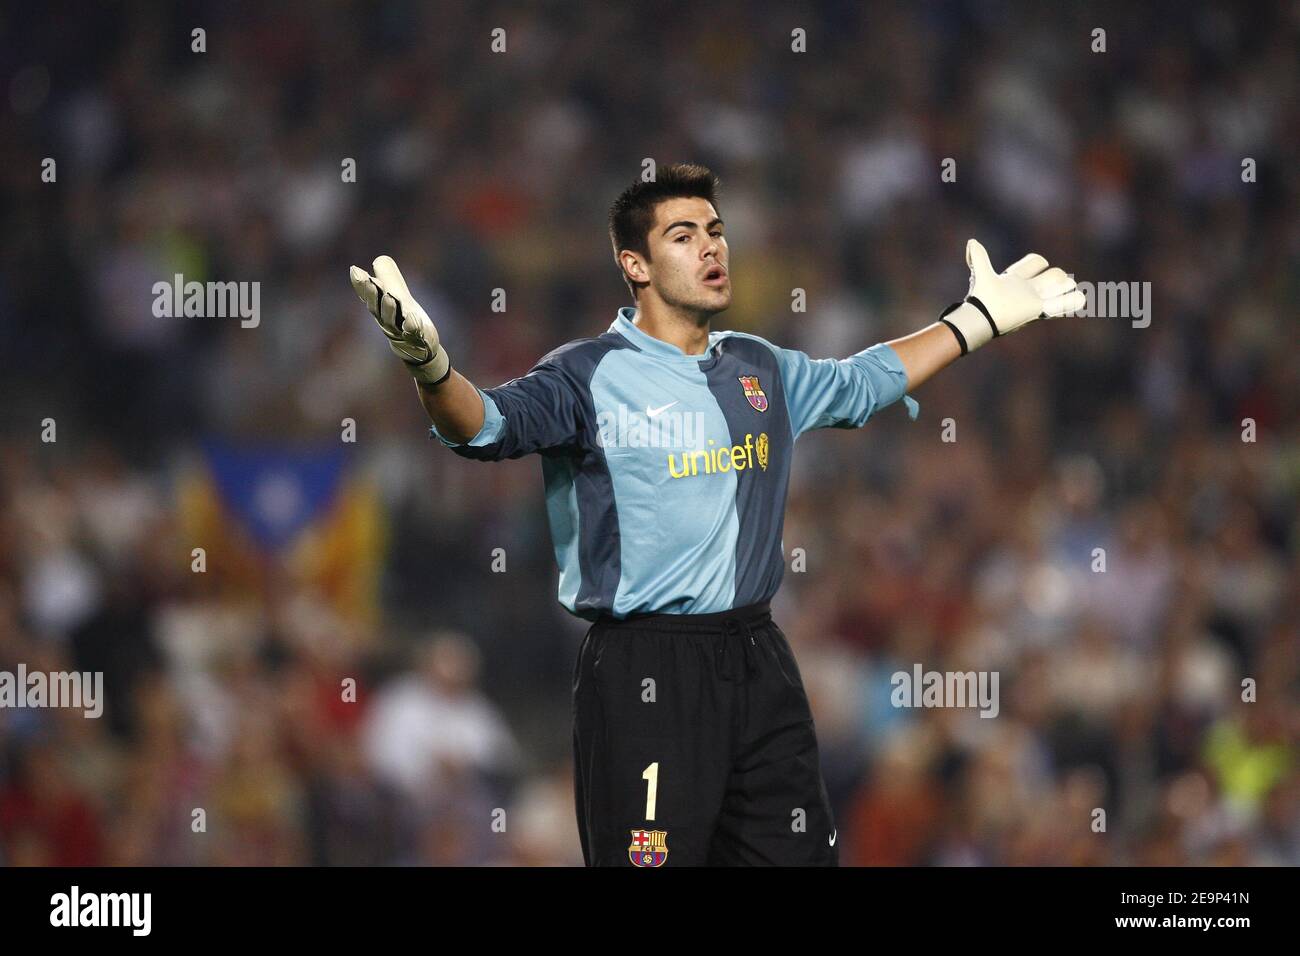 Barcelona's goalkeeper Victor Valdes during the UEFA Champions League, Group A, Barcelona vs Chelsea at the Camp Nou stadium in Barcelona, Spain on October 31, 2006. The match ended in a 2-2 draw. Photo by Christian Liewig/ABACAPRESS.COM Stock Photo